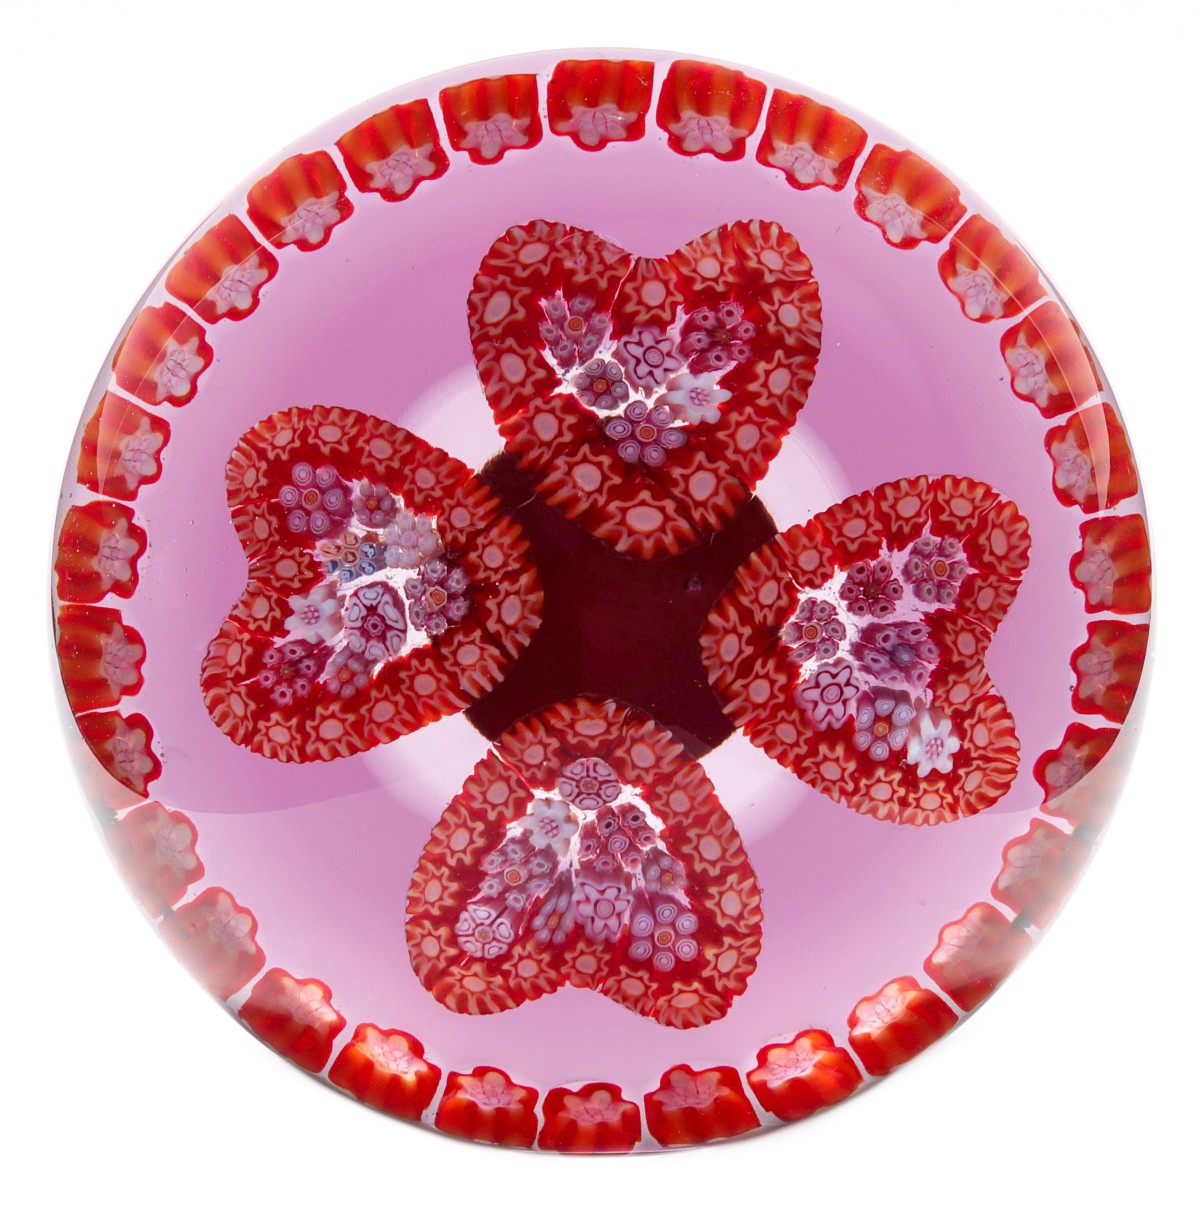 PARABELLE 1988 HEART PAPERWEIGHT IN RED, WHITE, PINK